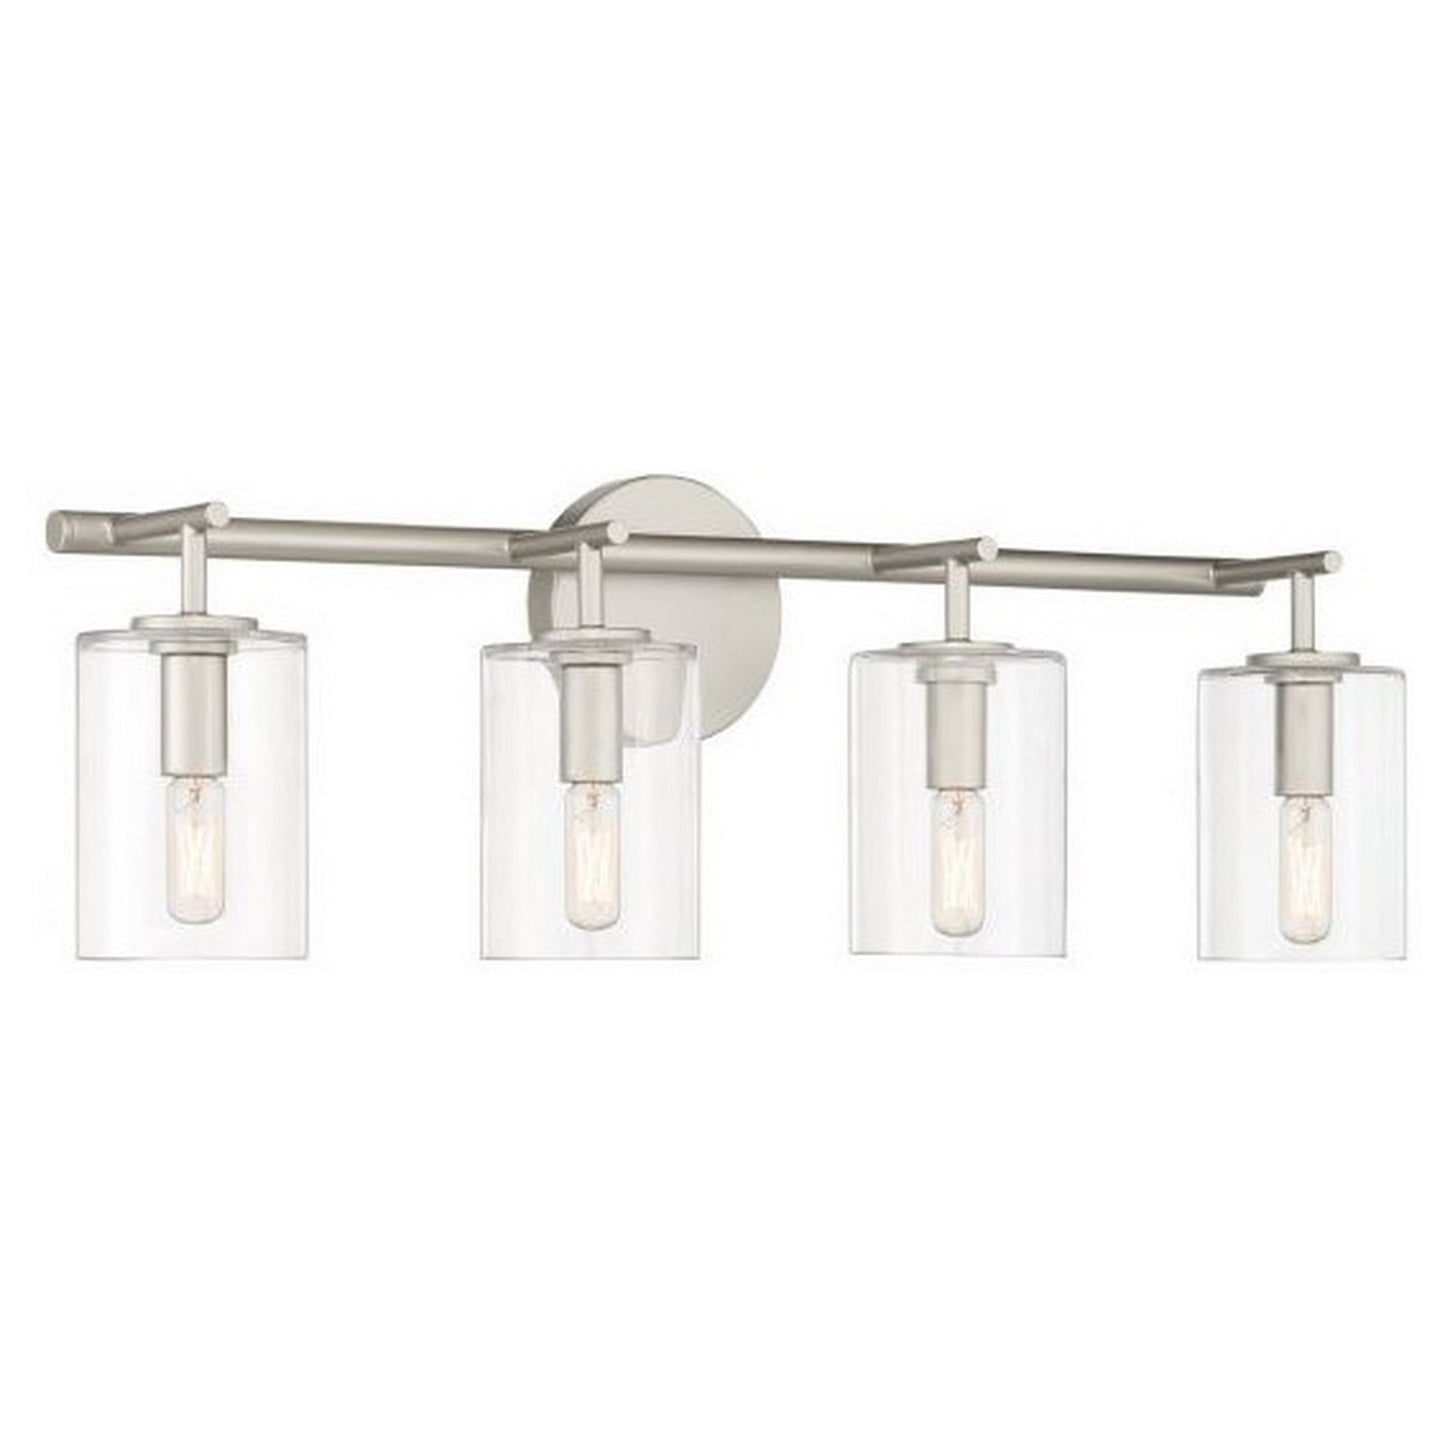 Craftmade Hailie 28" 4-Light Satin Nickel Vanity Light With Clear Glass Cylinder Shades